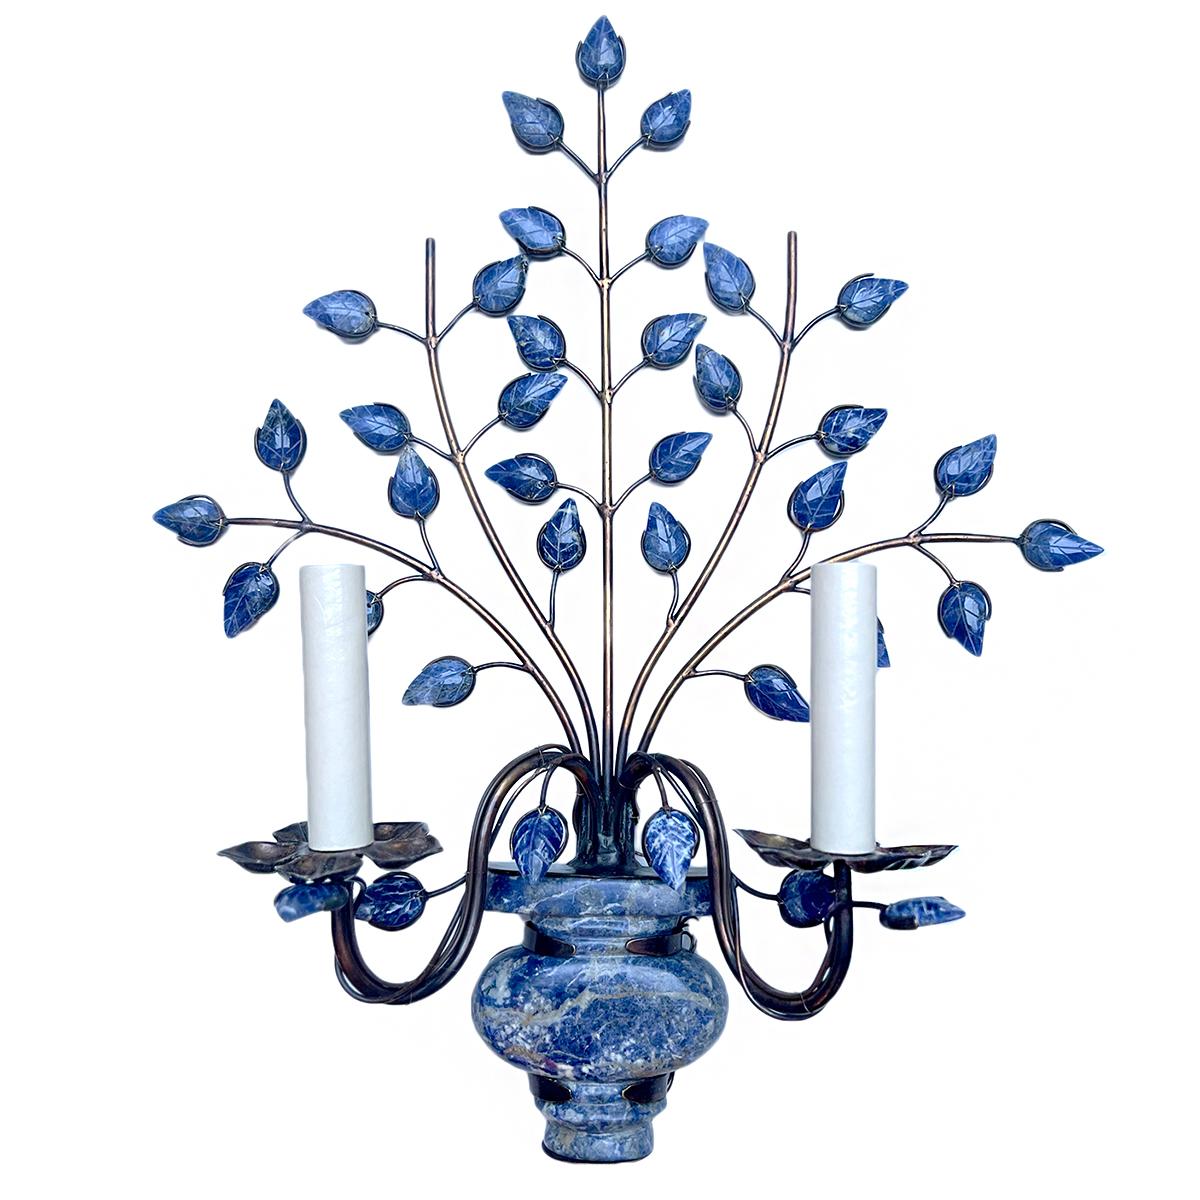 A set of four circa 1950's foliage motif sconces with lapis lazuli leaves. Sold per pair.

Measurements:
Height: 20